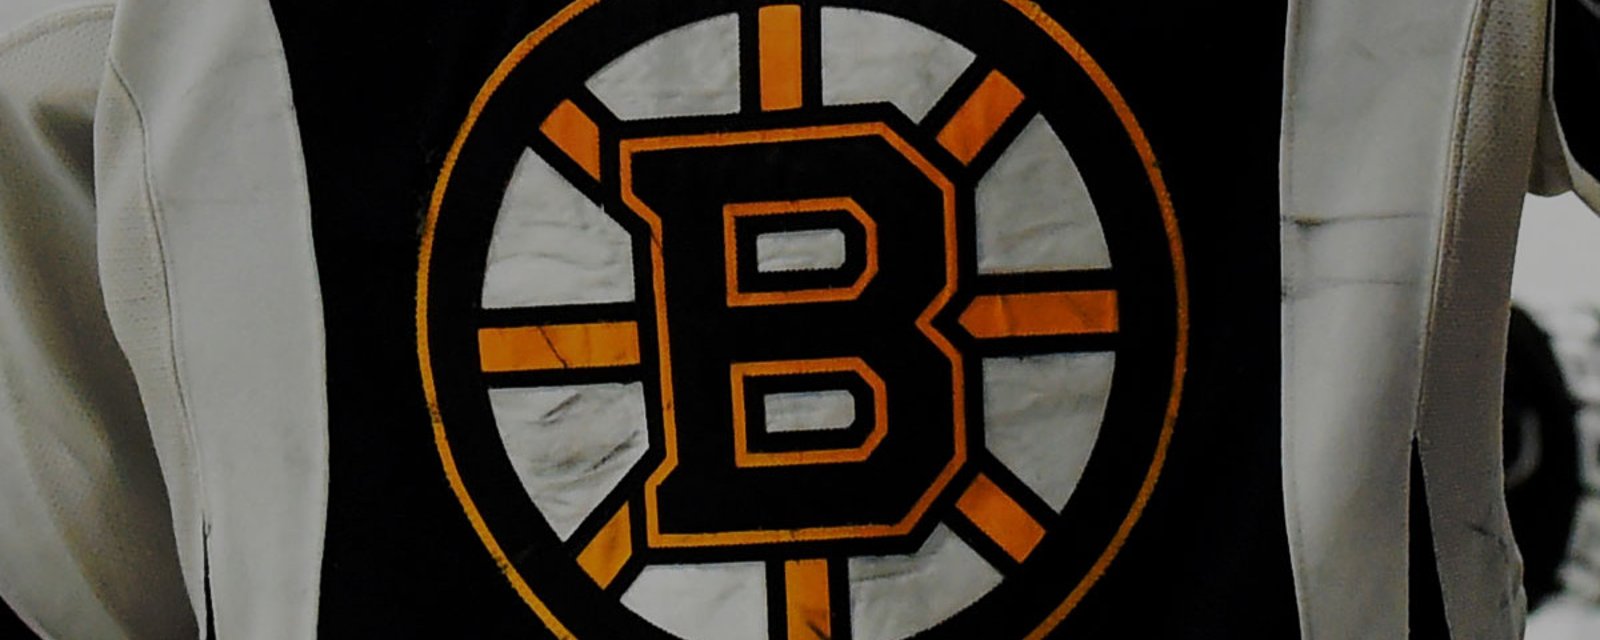 Bruins unsastified with one their player, send him straight to East Coast League!